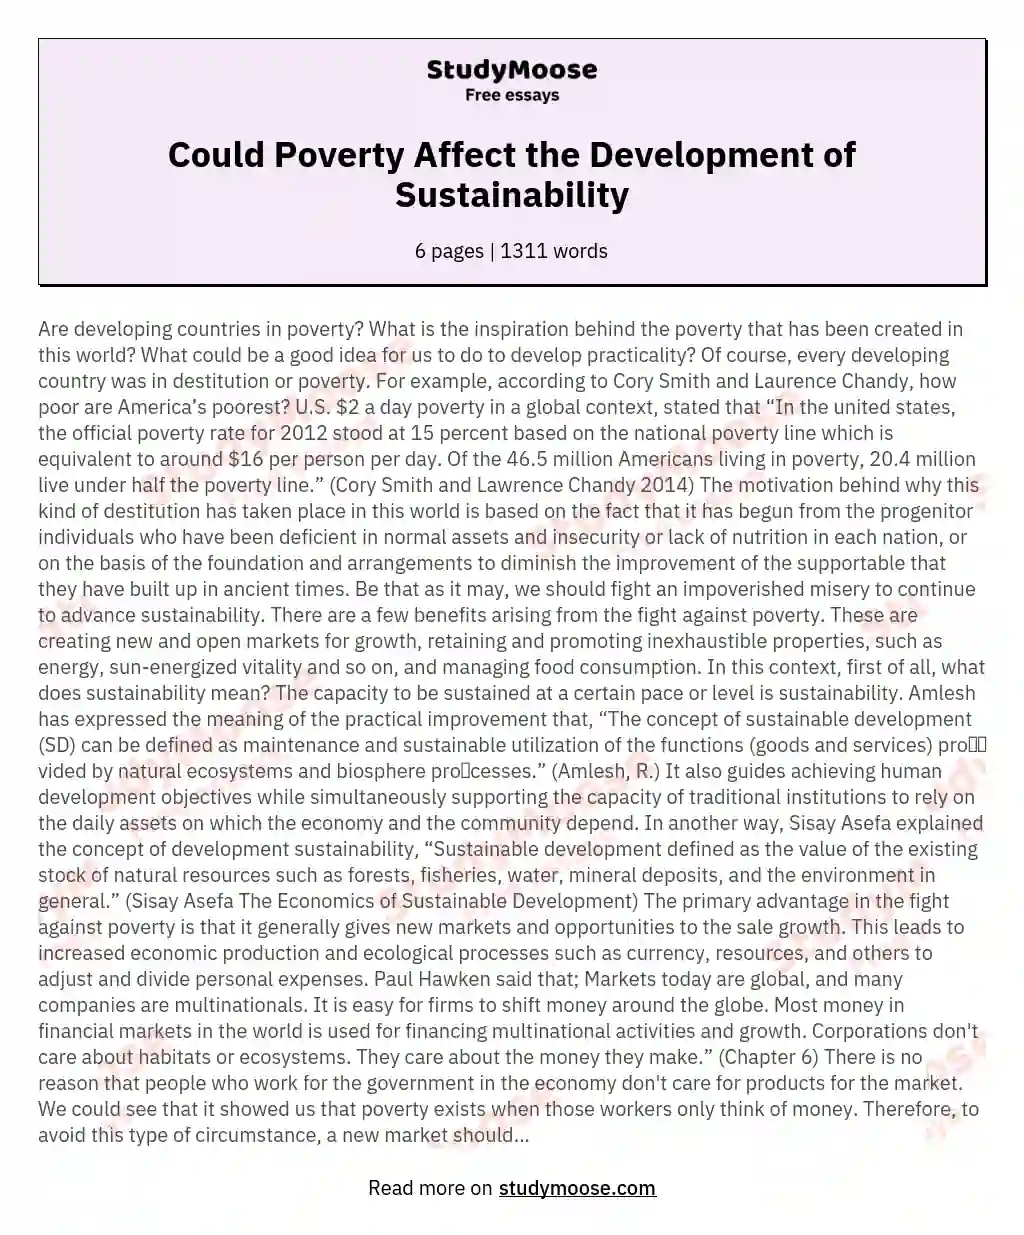 Could Poverty Affect the Development of Sustainability essay